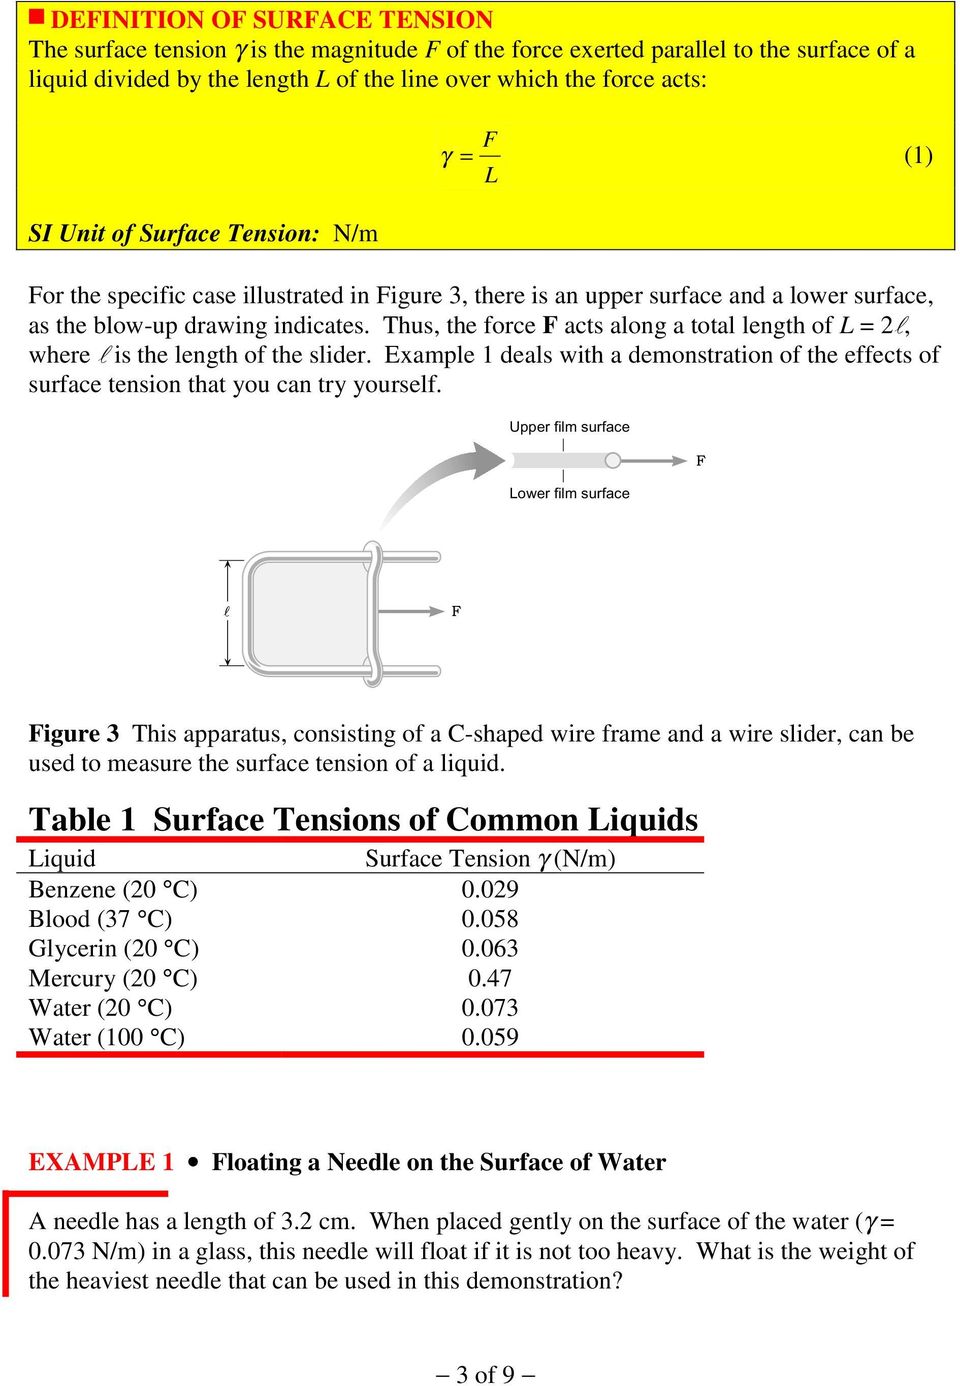 surface tension definition and example